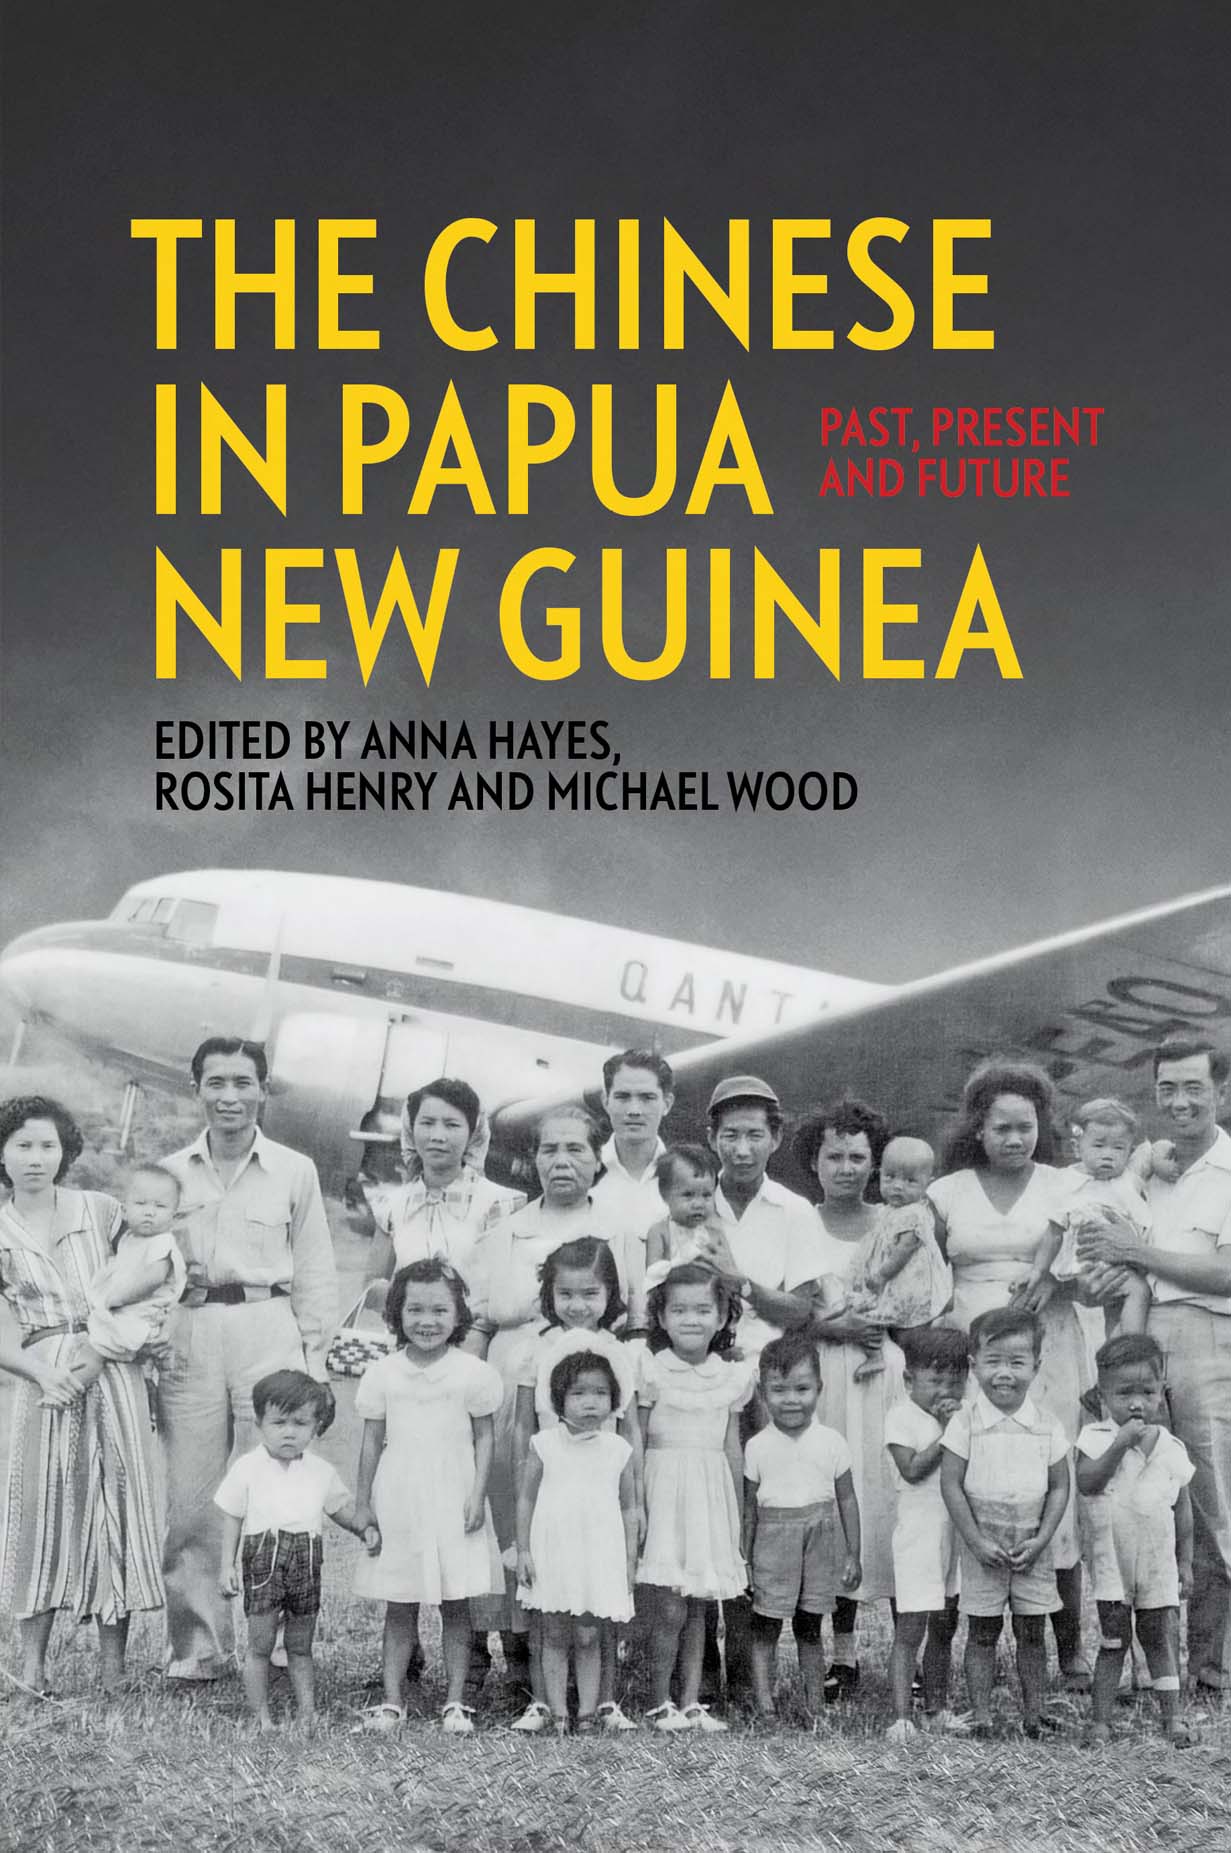 The Chinese in Papua New Guinea